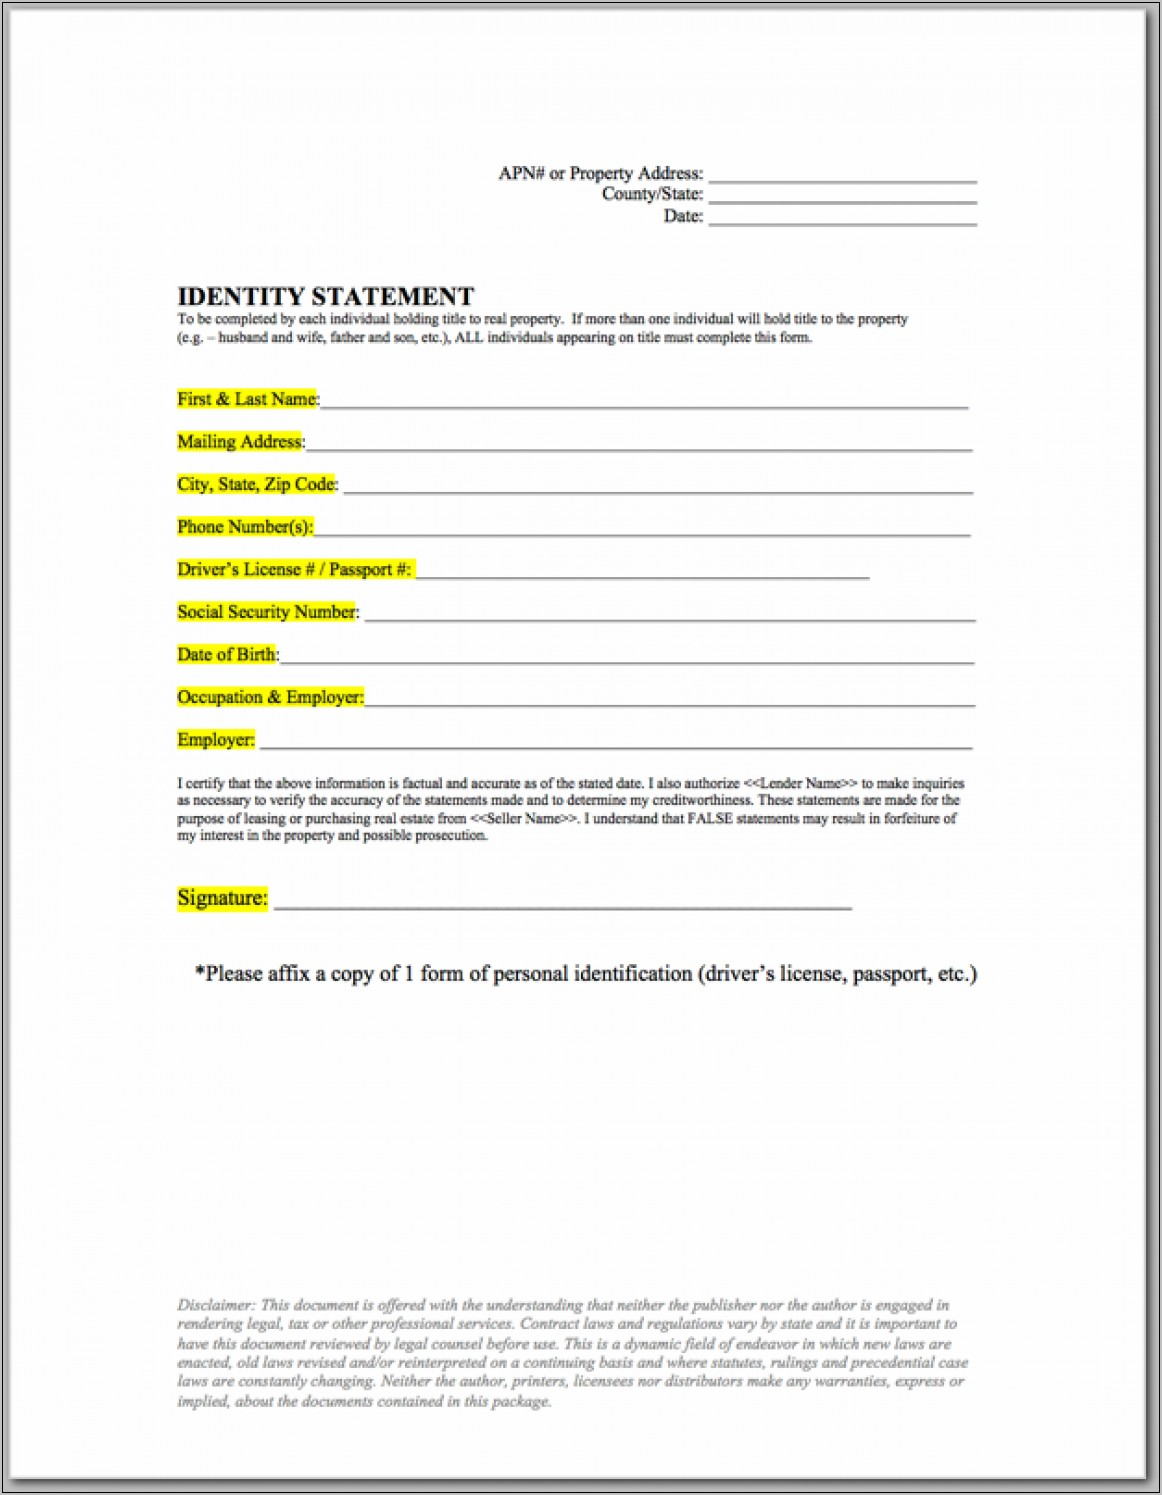 Owner Financing Contract Template Florida